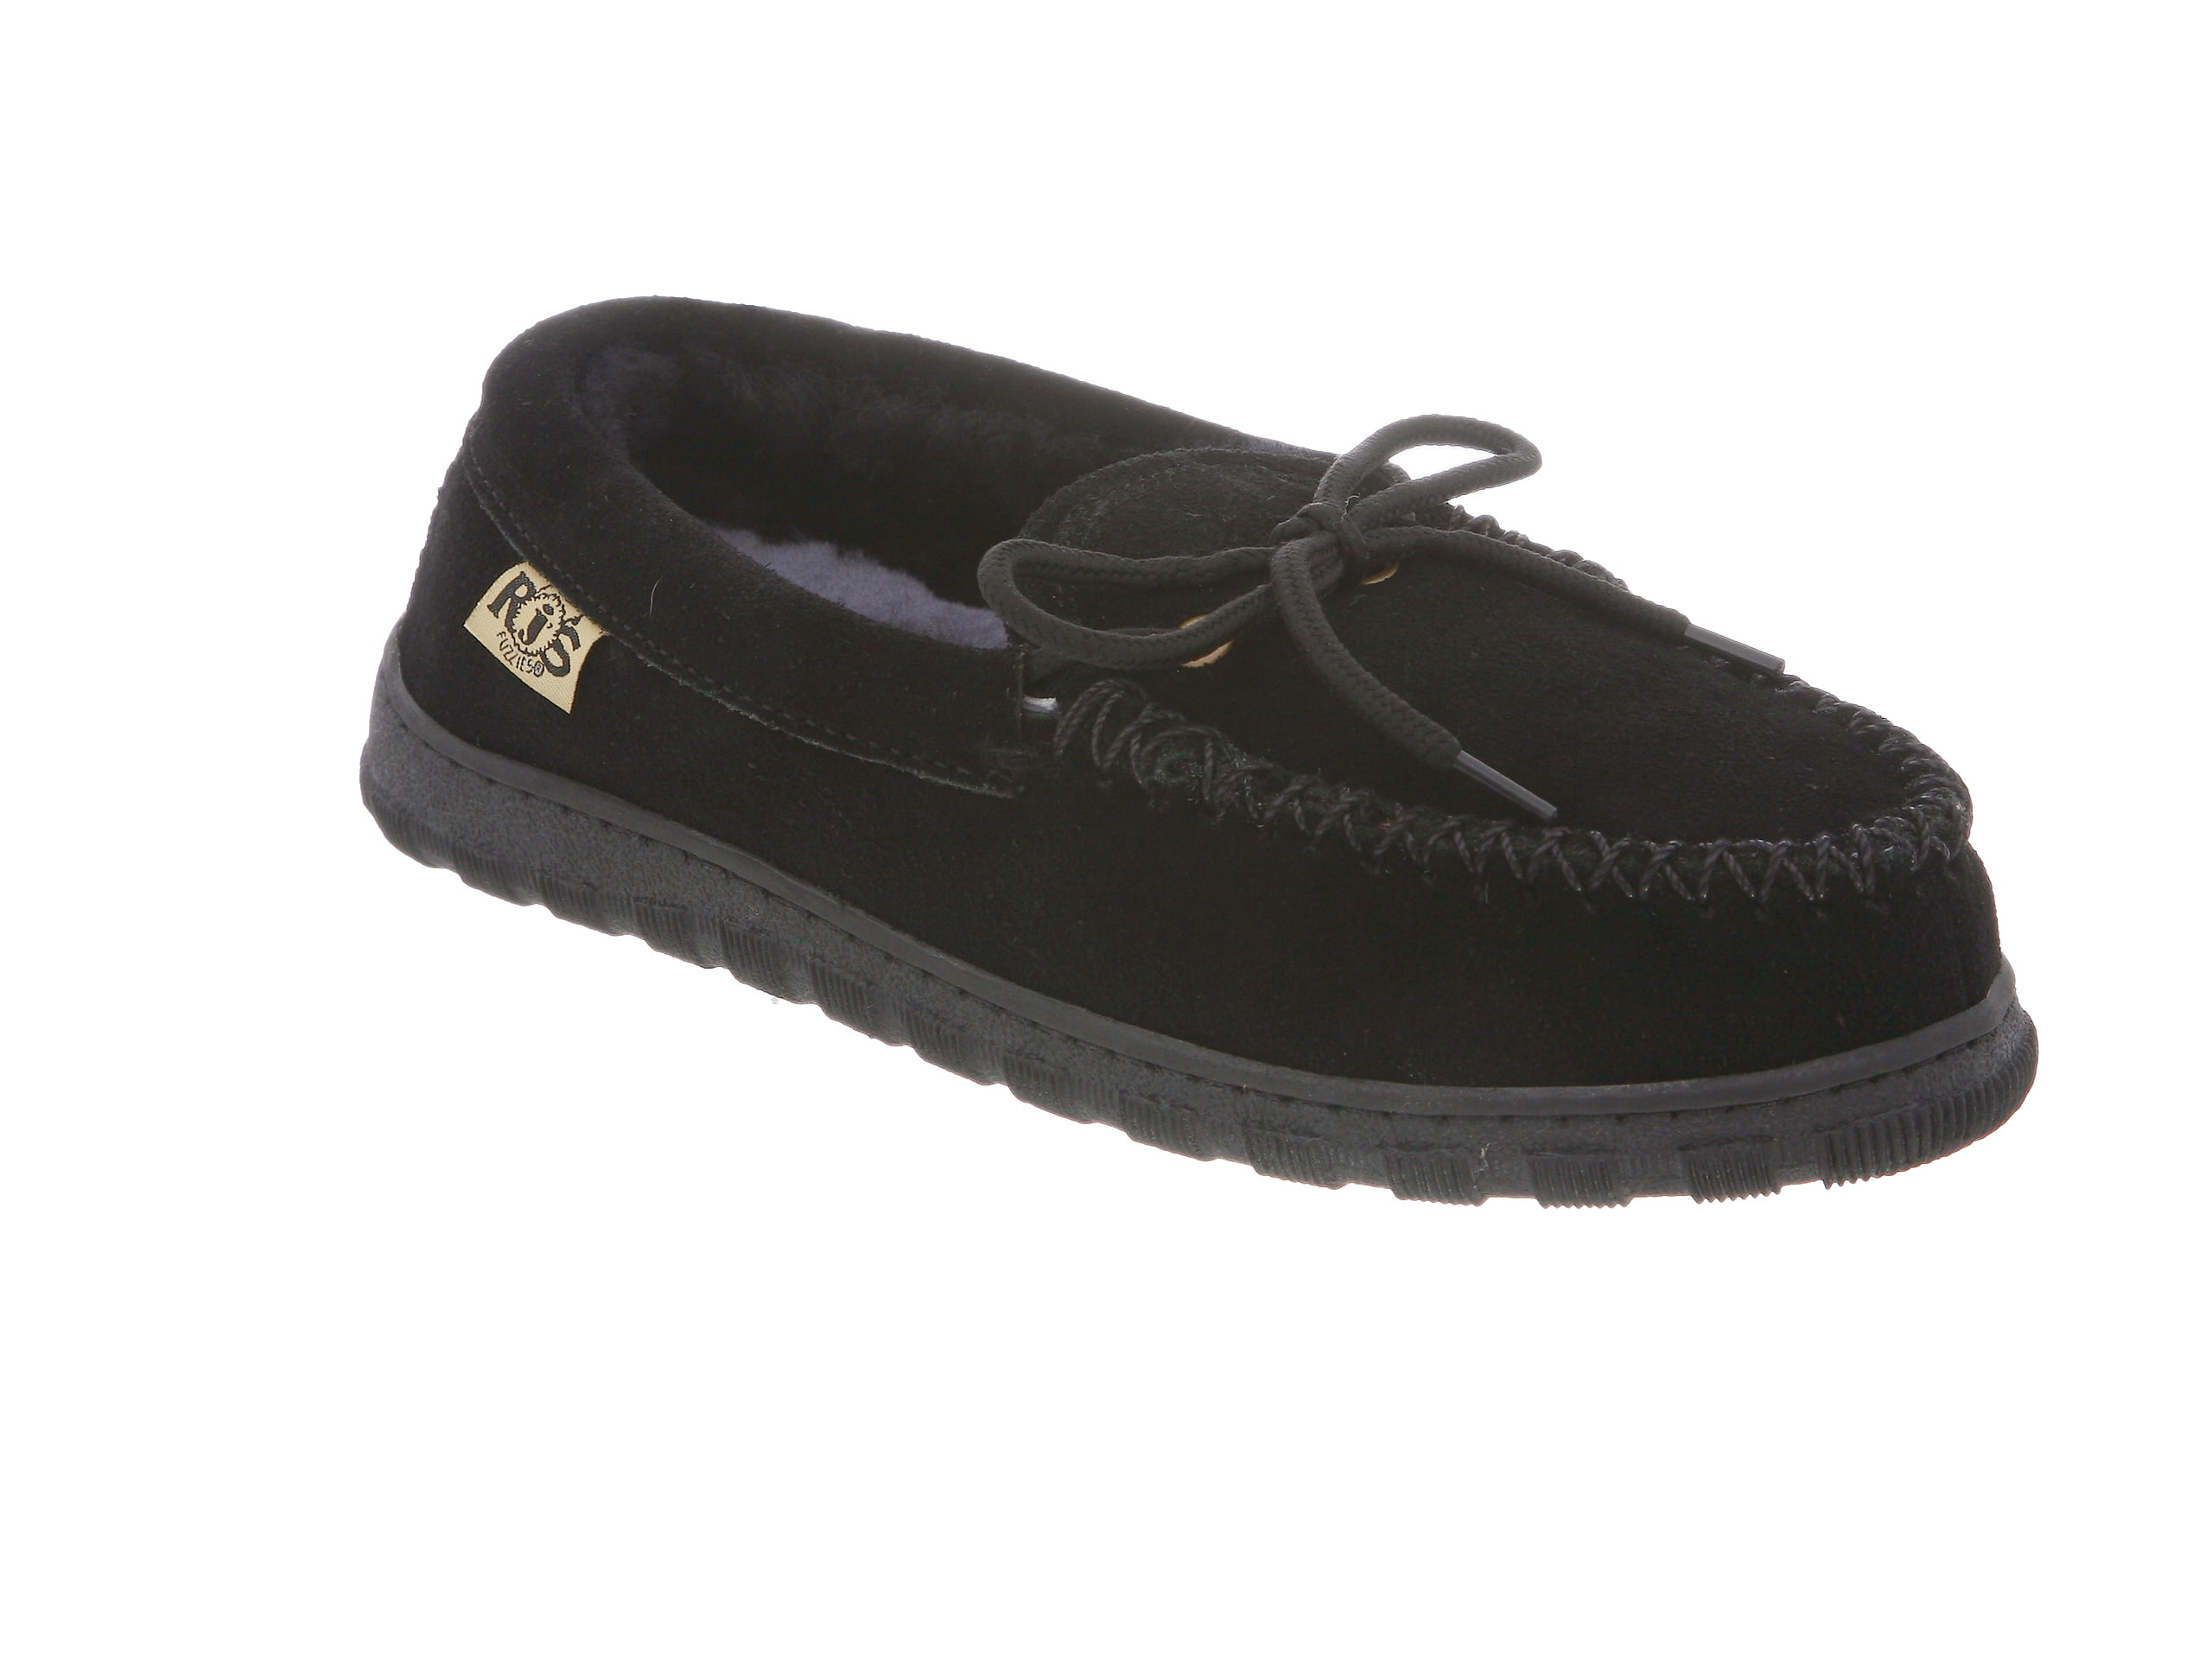 RJ's Fuzzies Black Leather Moccasins Slippers (Size 5) RJS 101-5 New ...